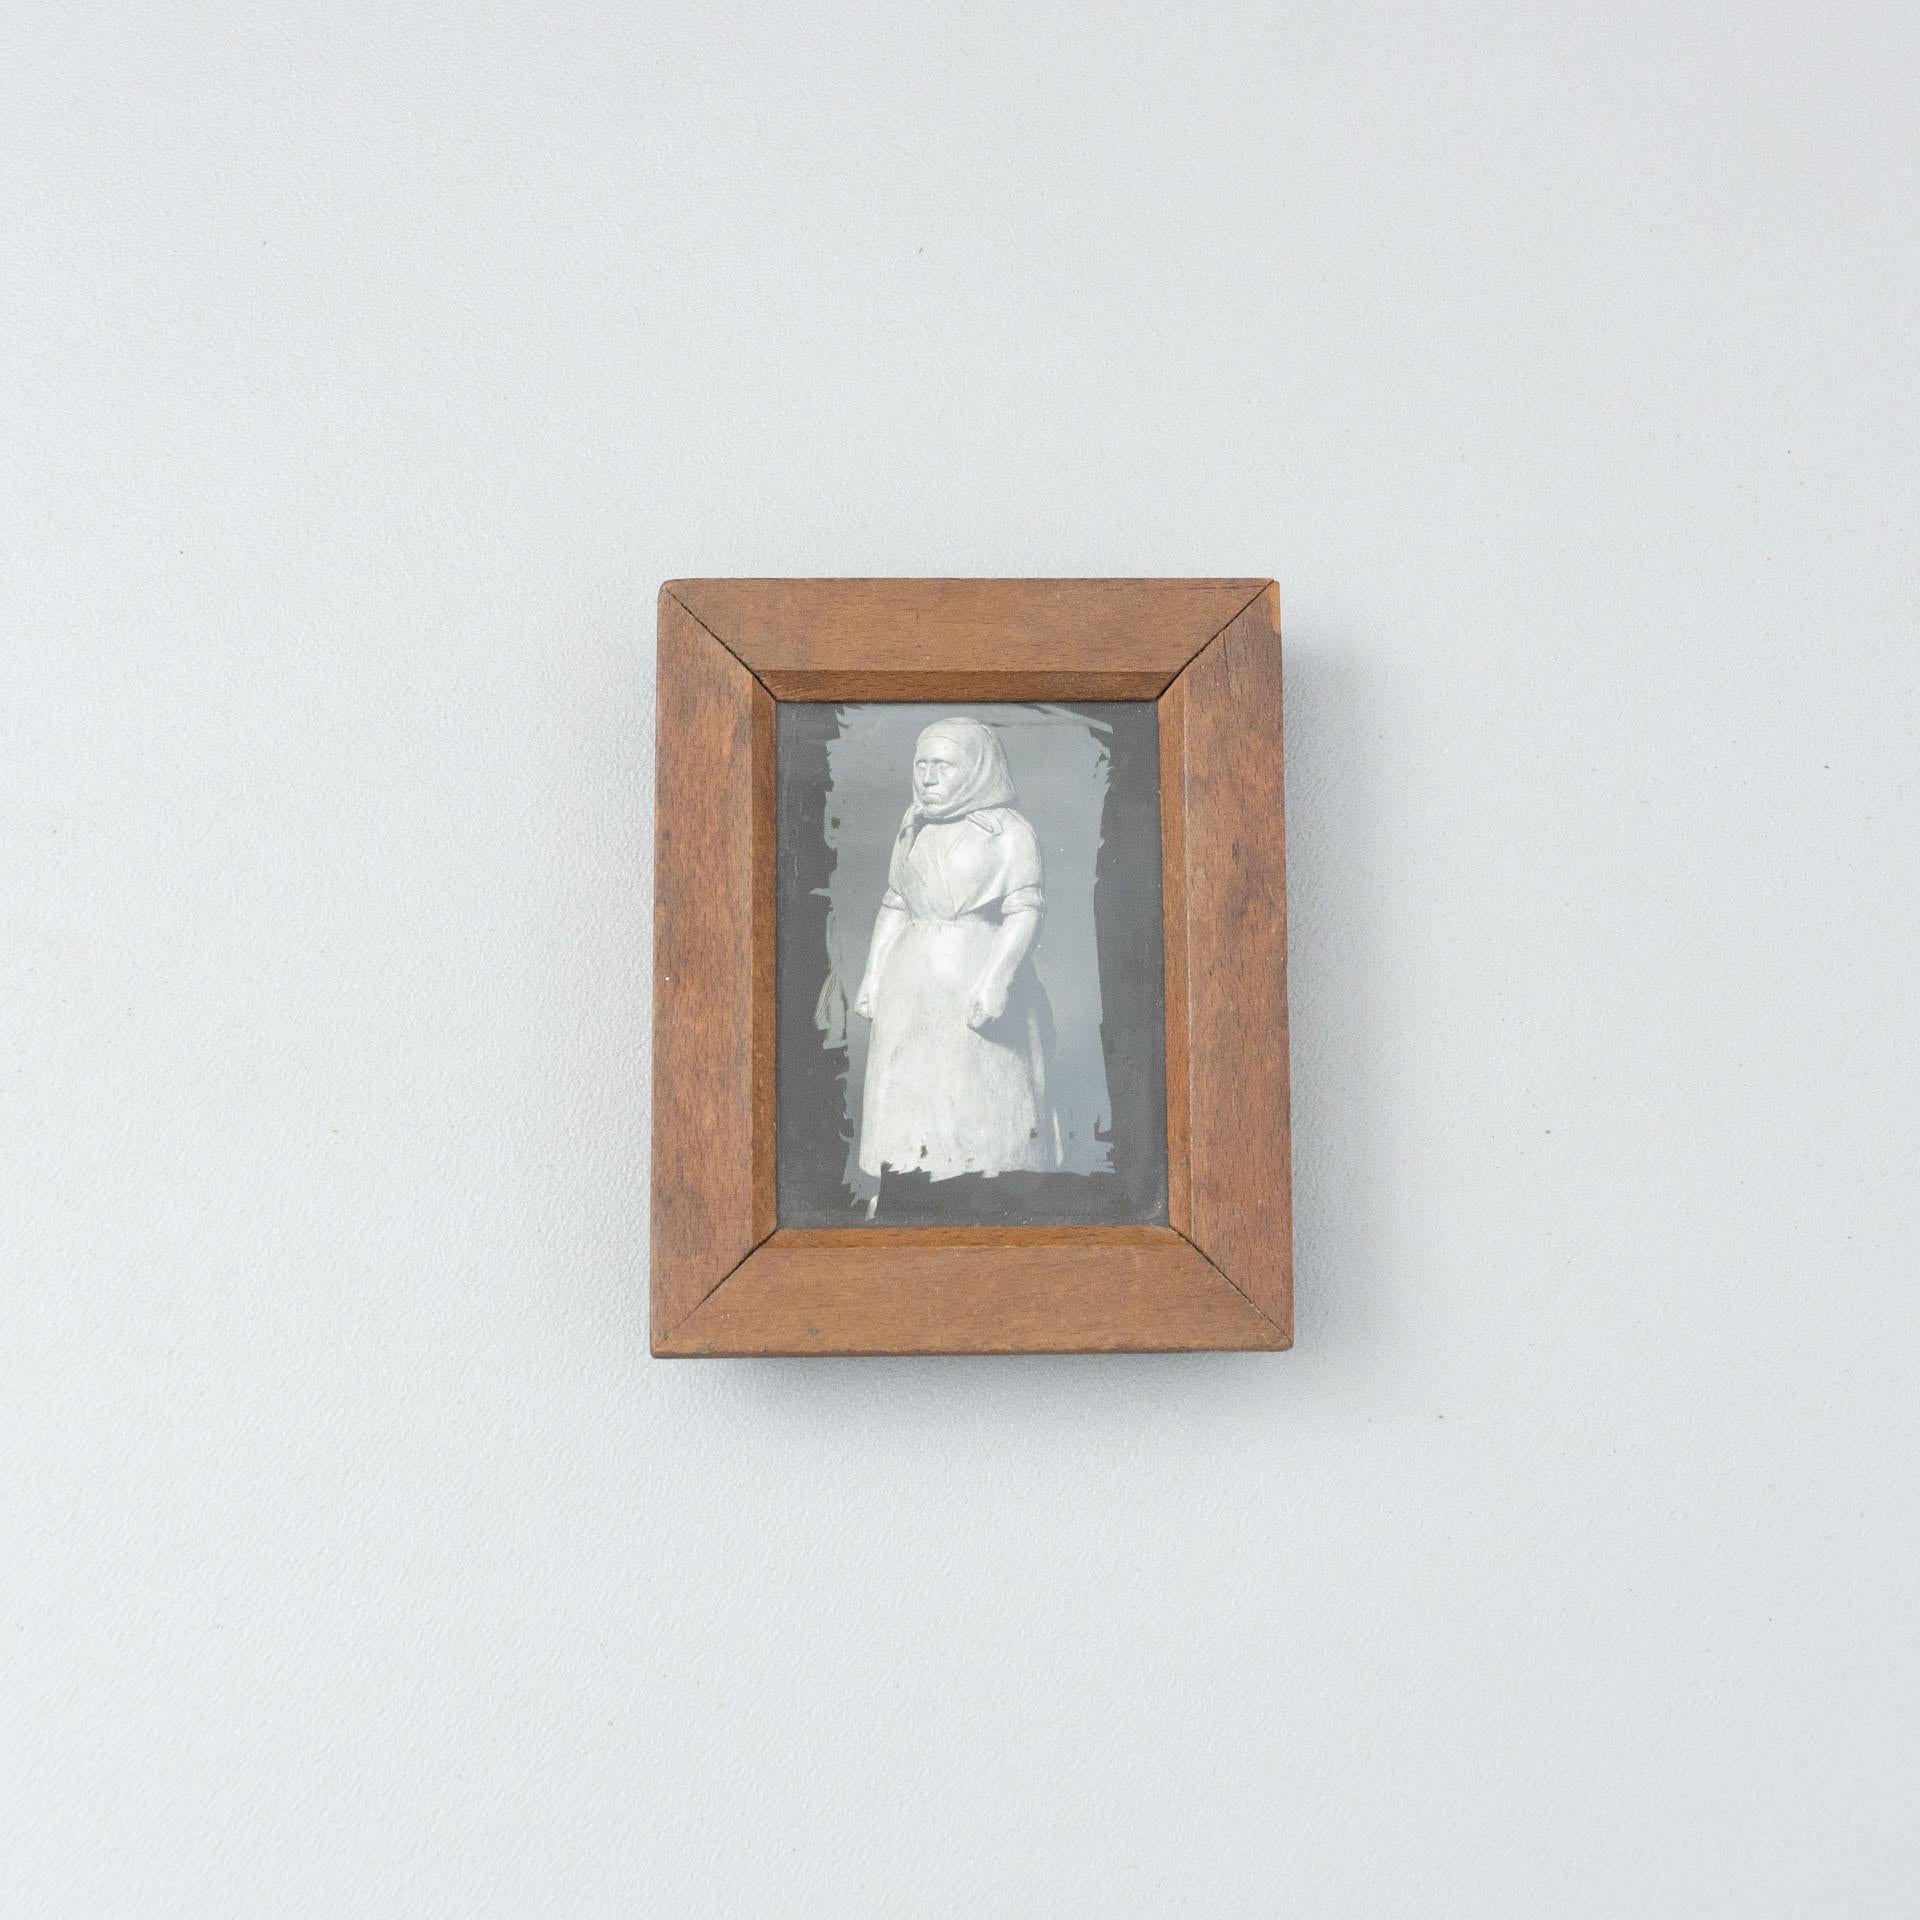 Manolo Hugué archive photography of sculpture.
Printed, circa 1960.
Wood frame included.

Materials:
Gelatin silver bromide print

Dimensions:
D 3.4 cm x W 12.9 cm x H 15.9 cm

We offer free worldwide shipping for this piece.